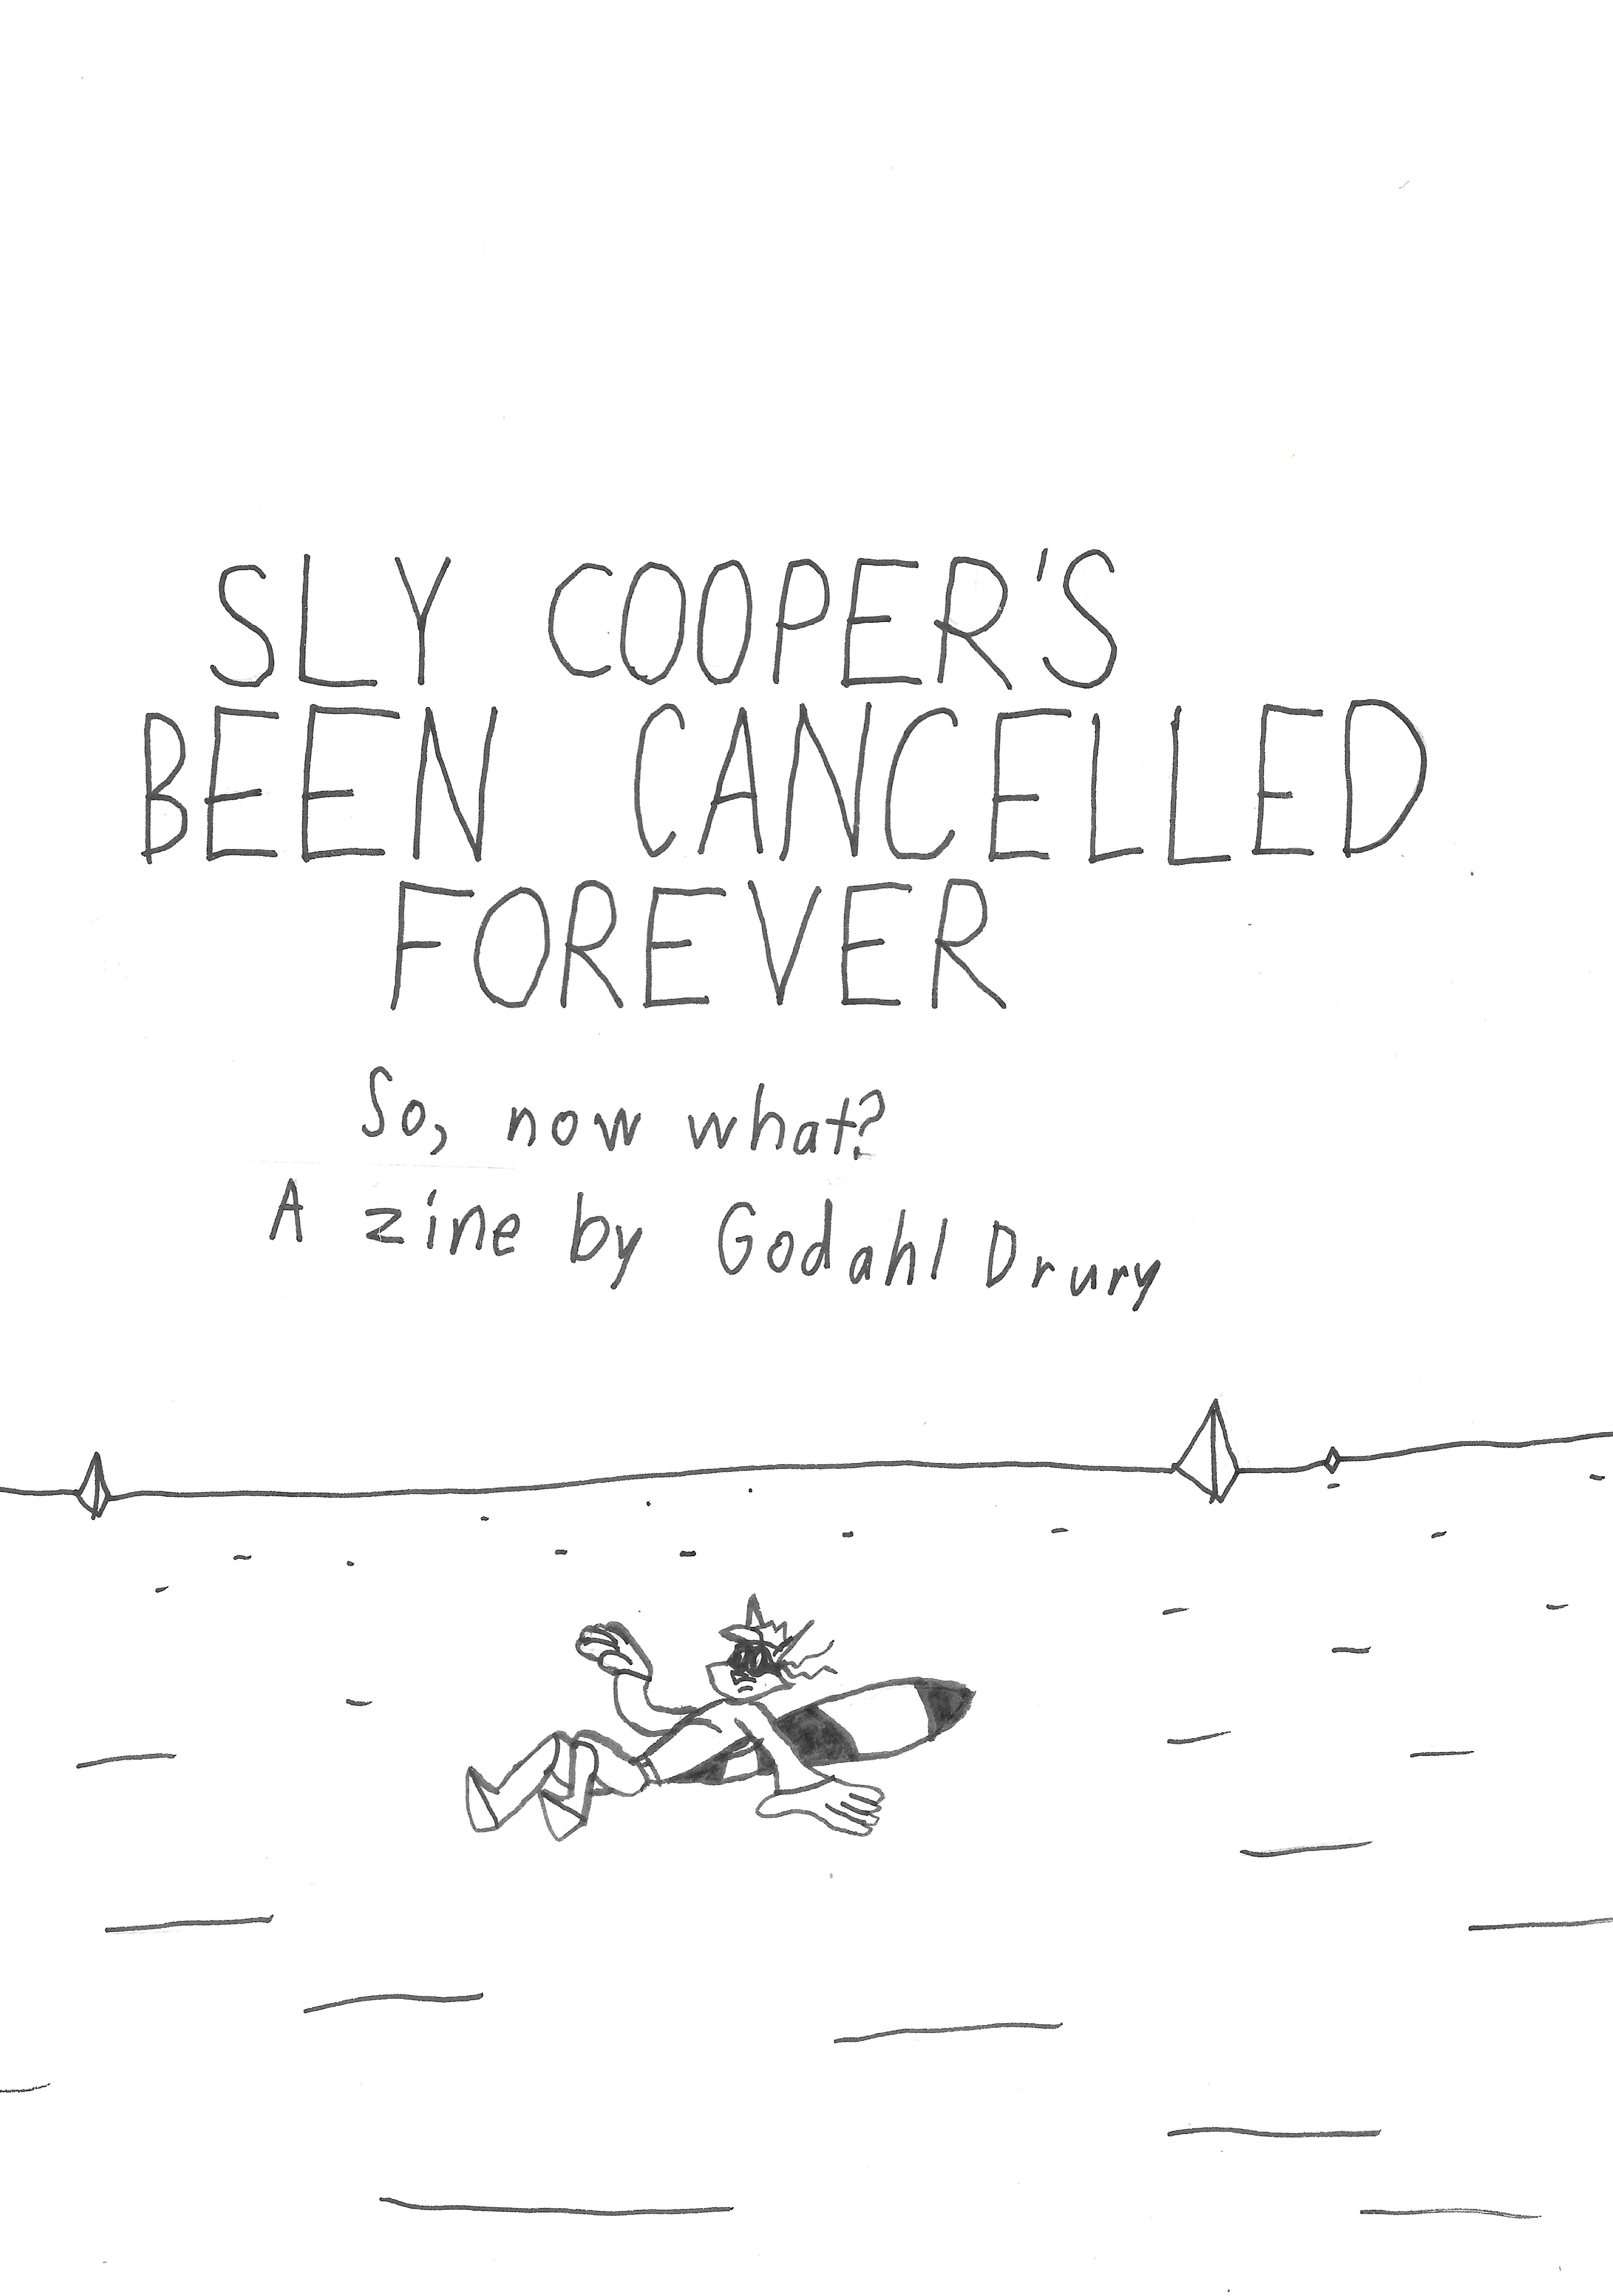 Sly Cooper's been cancelled forever. So now what? By Godahl Drury. Sly Cooper lies down alone in a desert.